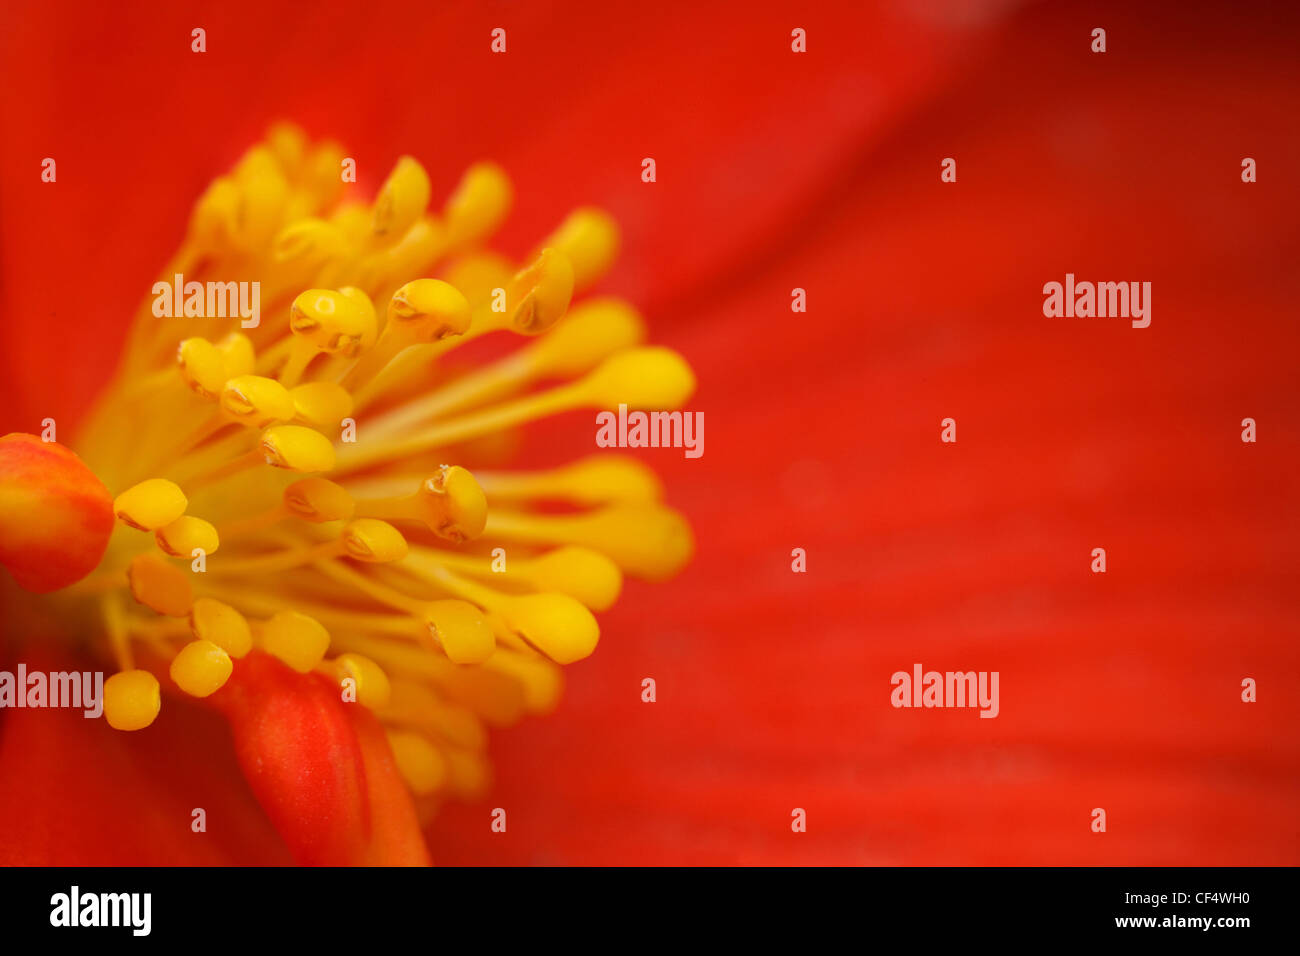 yellow stamens of the flower begonia with red petals, close-up photography Stock Photo